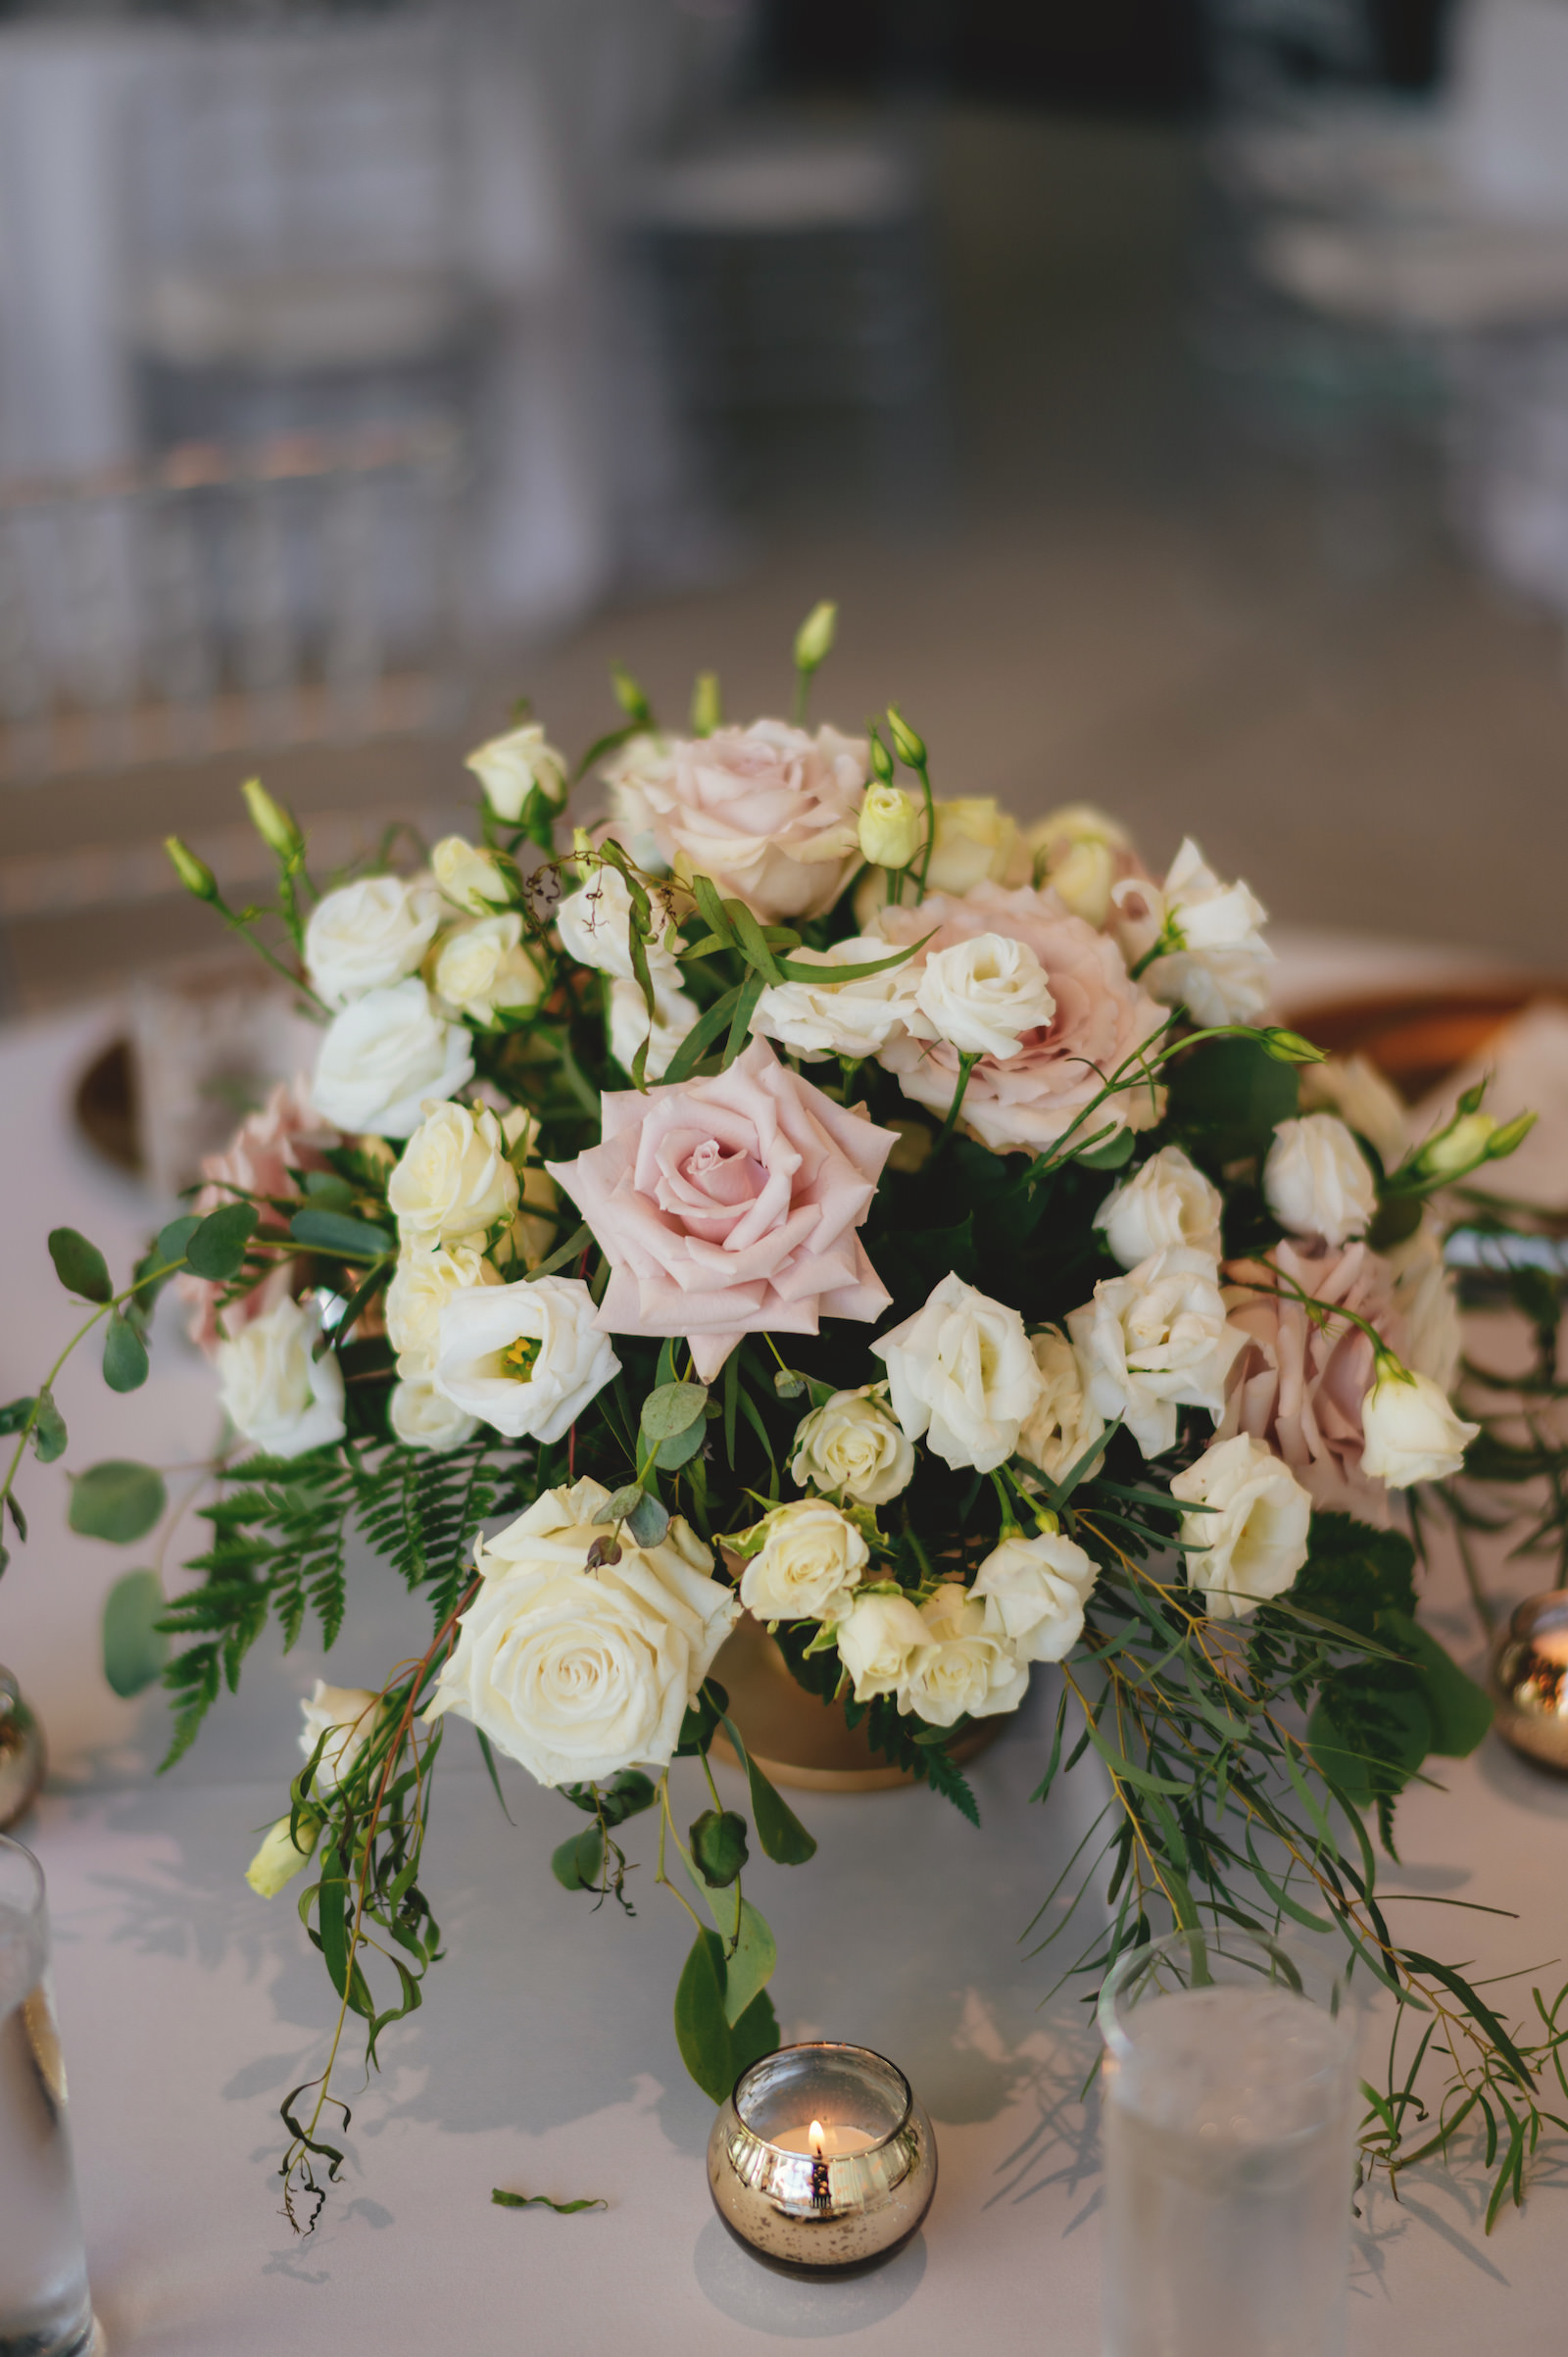 Modern Minimalist Wedding Reception Decor, Low White and Blush Pink Roses with Greenery Floral Centerpiece, Wooden Table Number